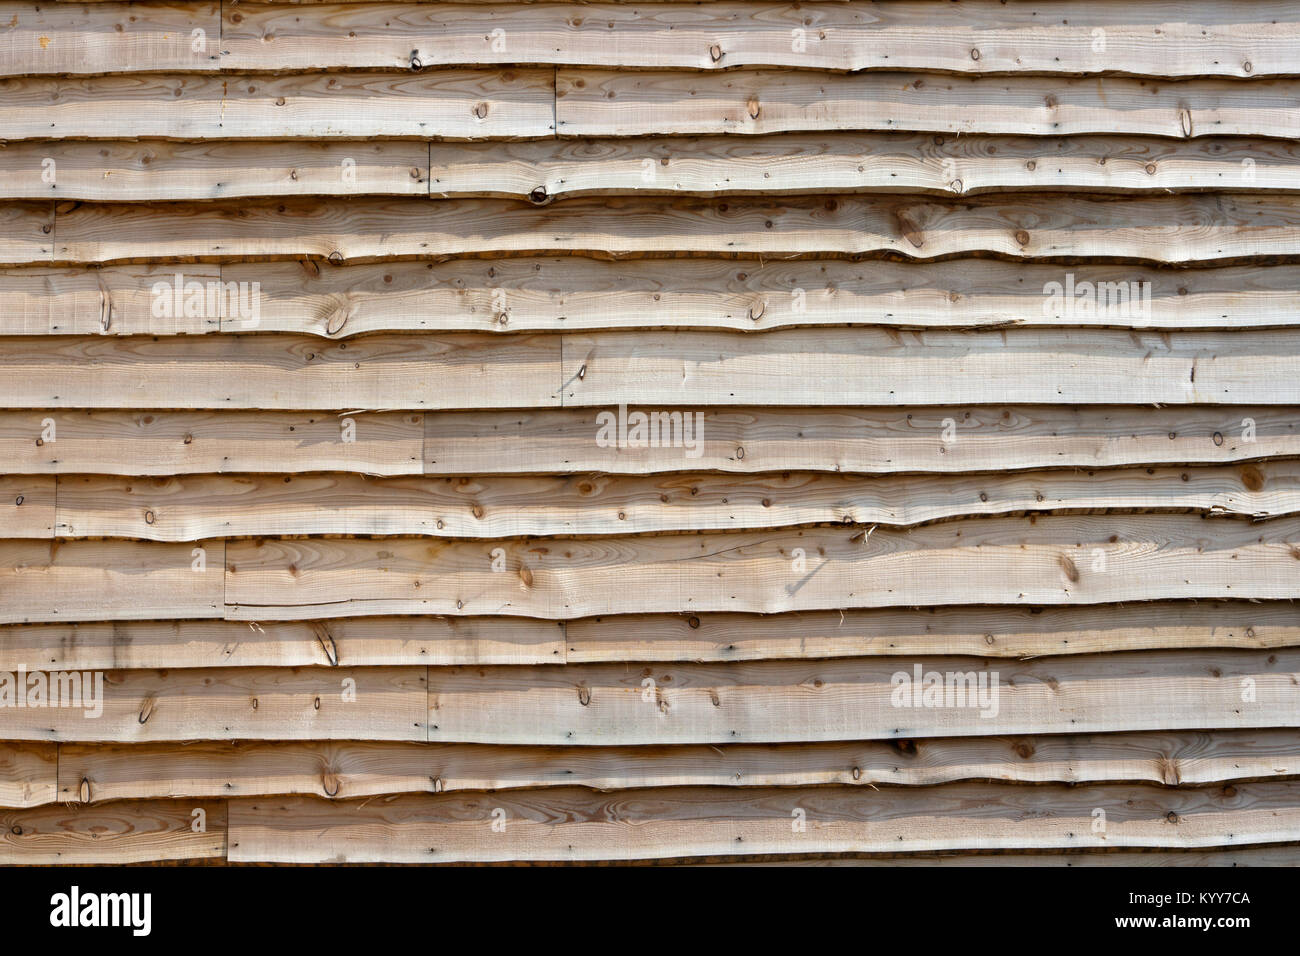 Rustic feather-edge timber wall Stock Photo